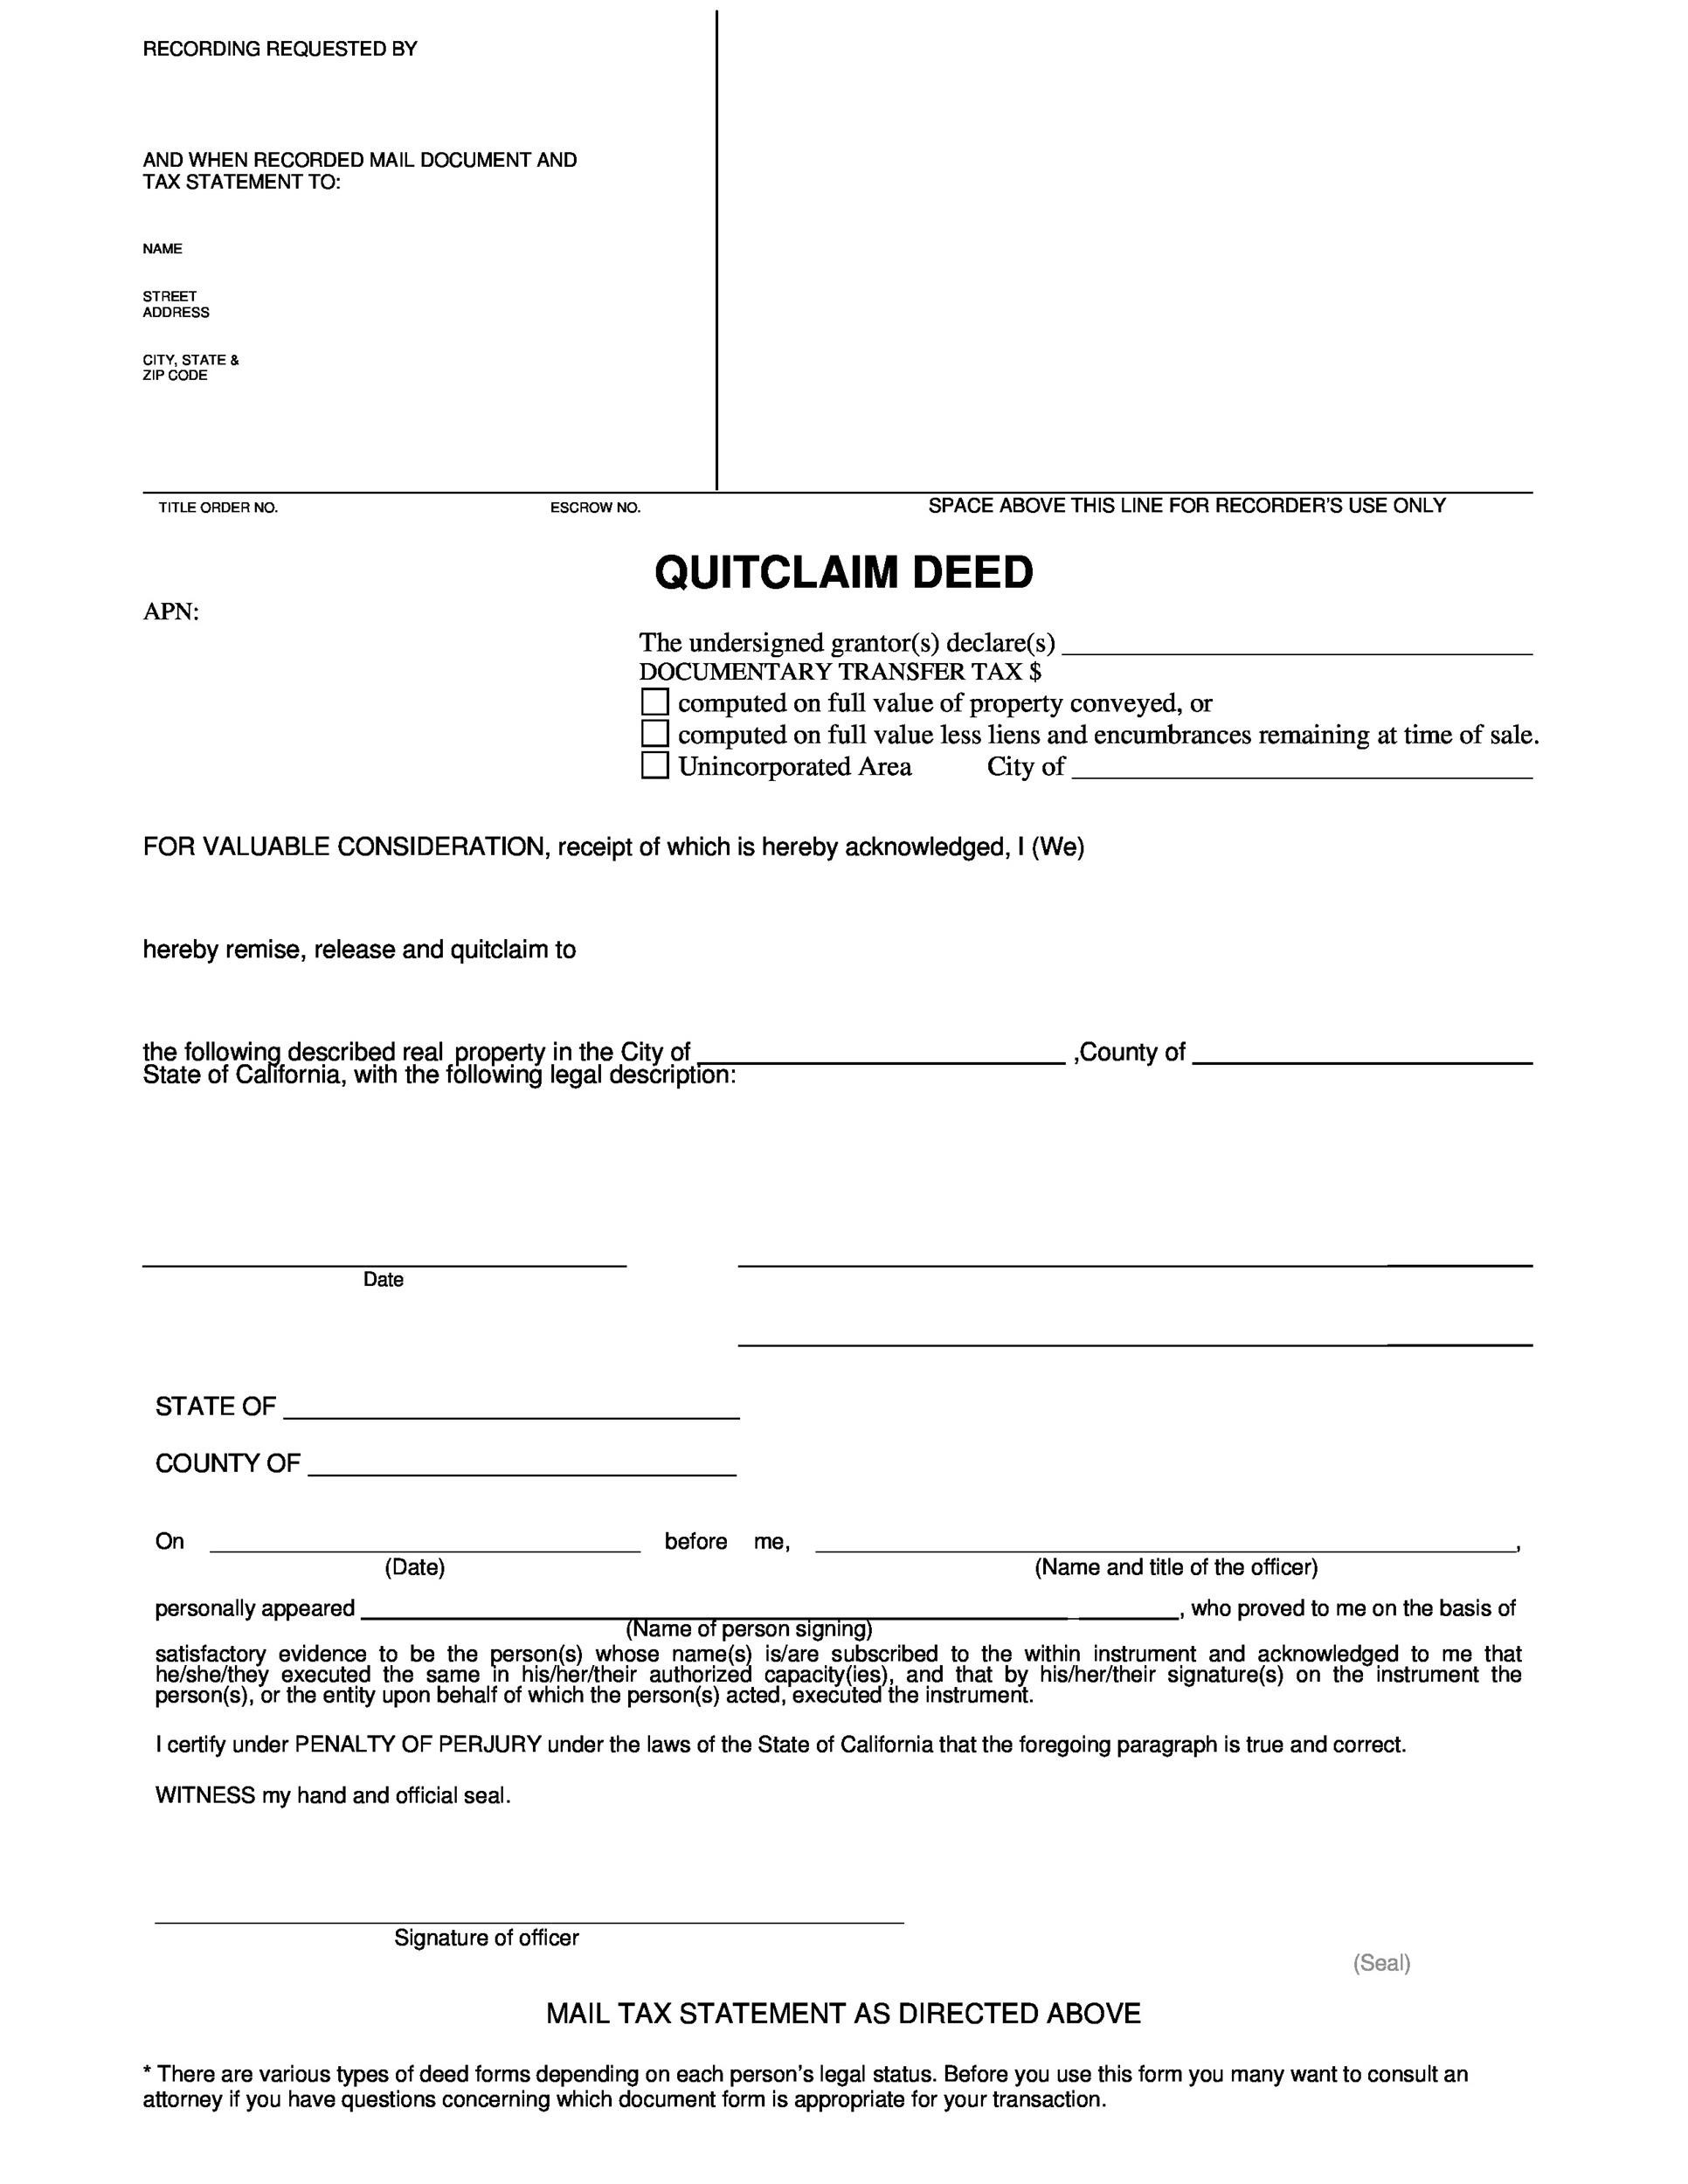 Free Printable Blank Quick Claim Deed Form Printable Forms Free Online